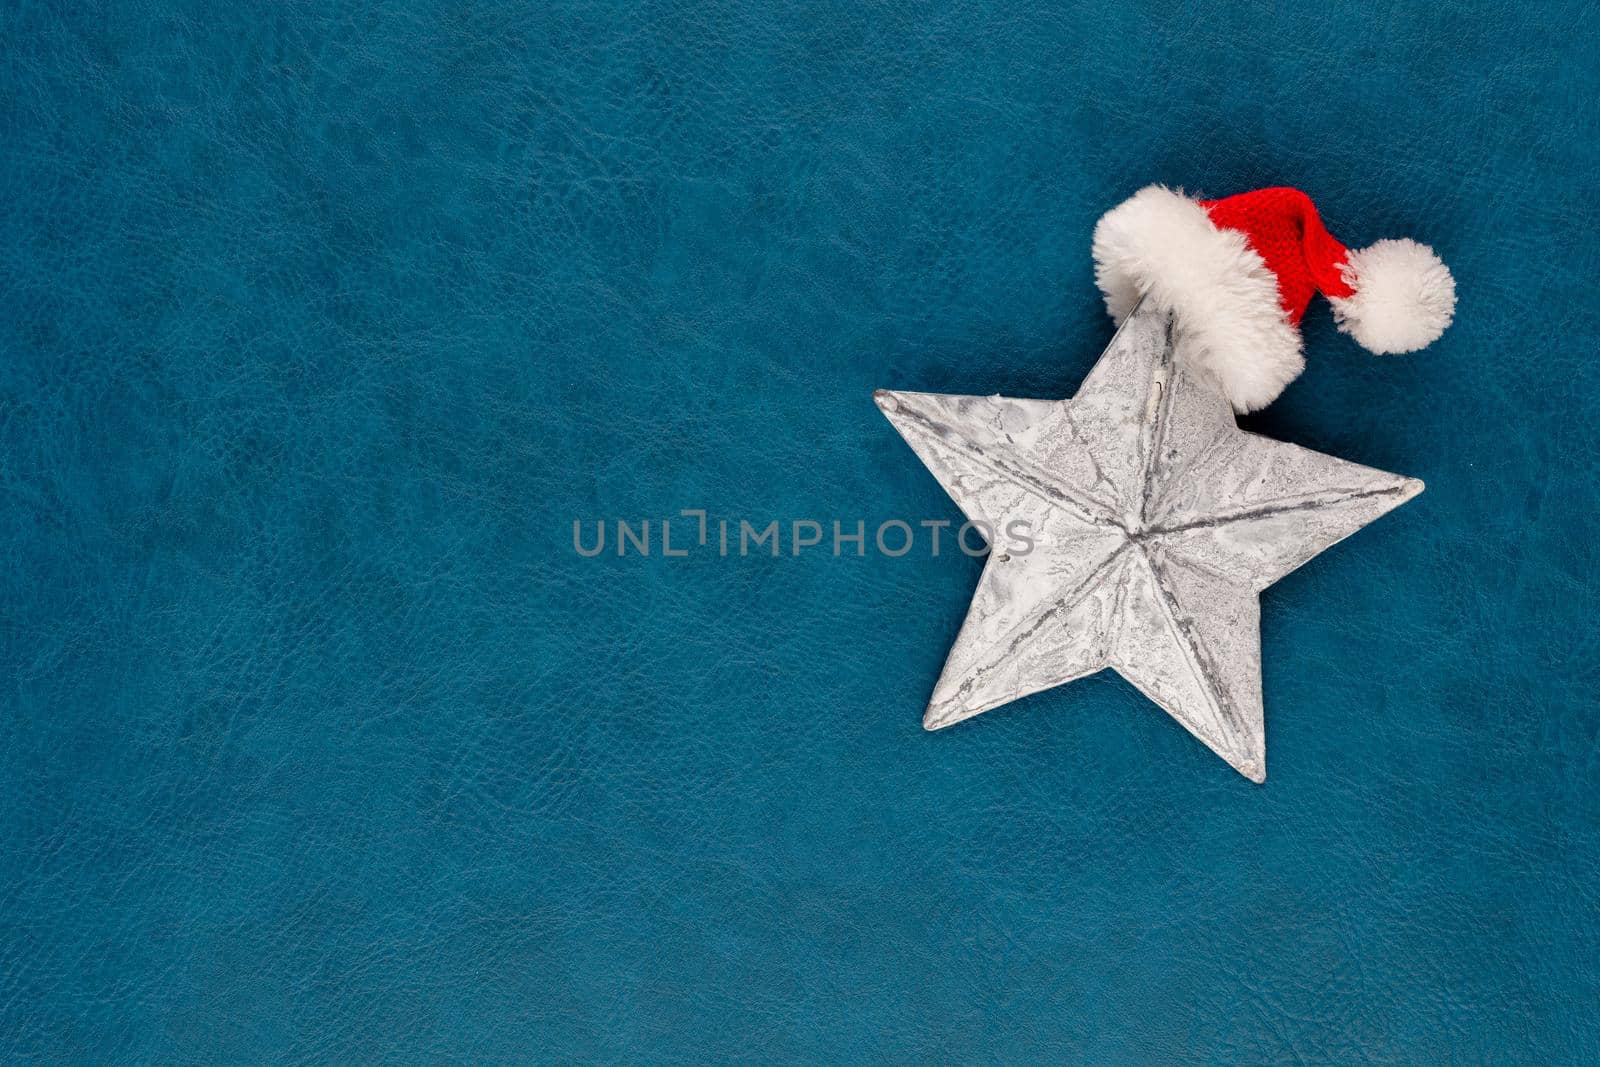 Christmas star with santa hat decoration. Christmas star on blue background.